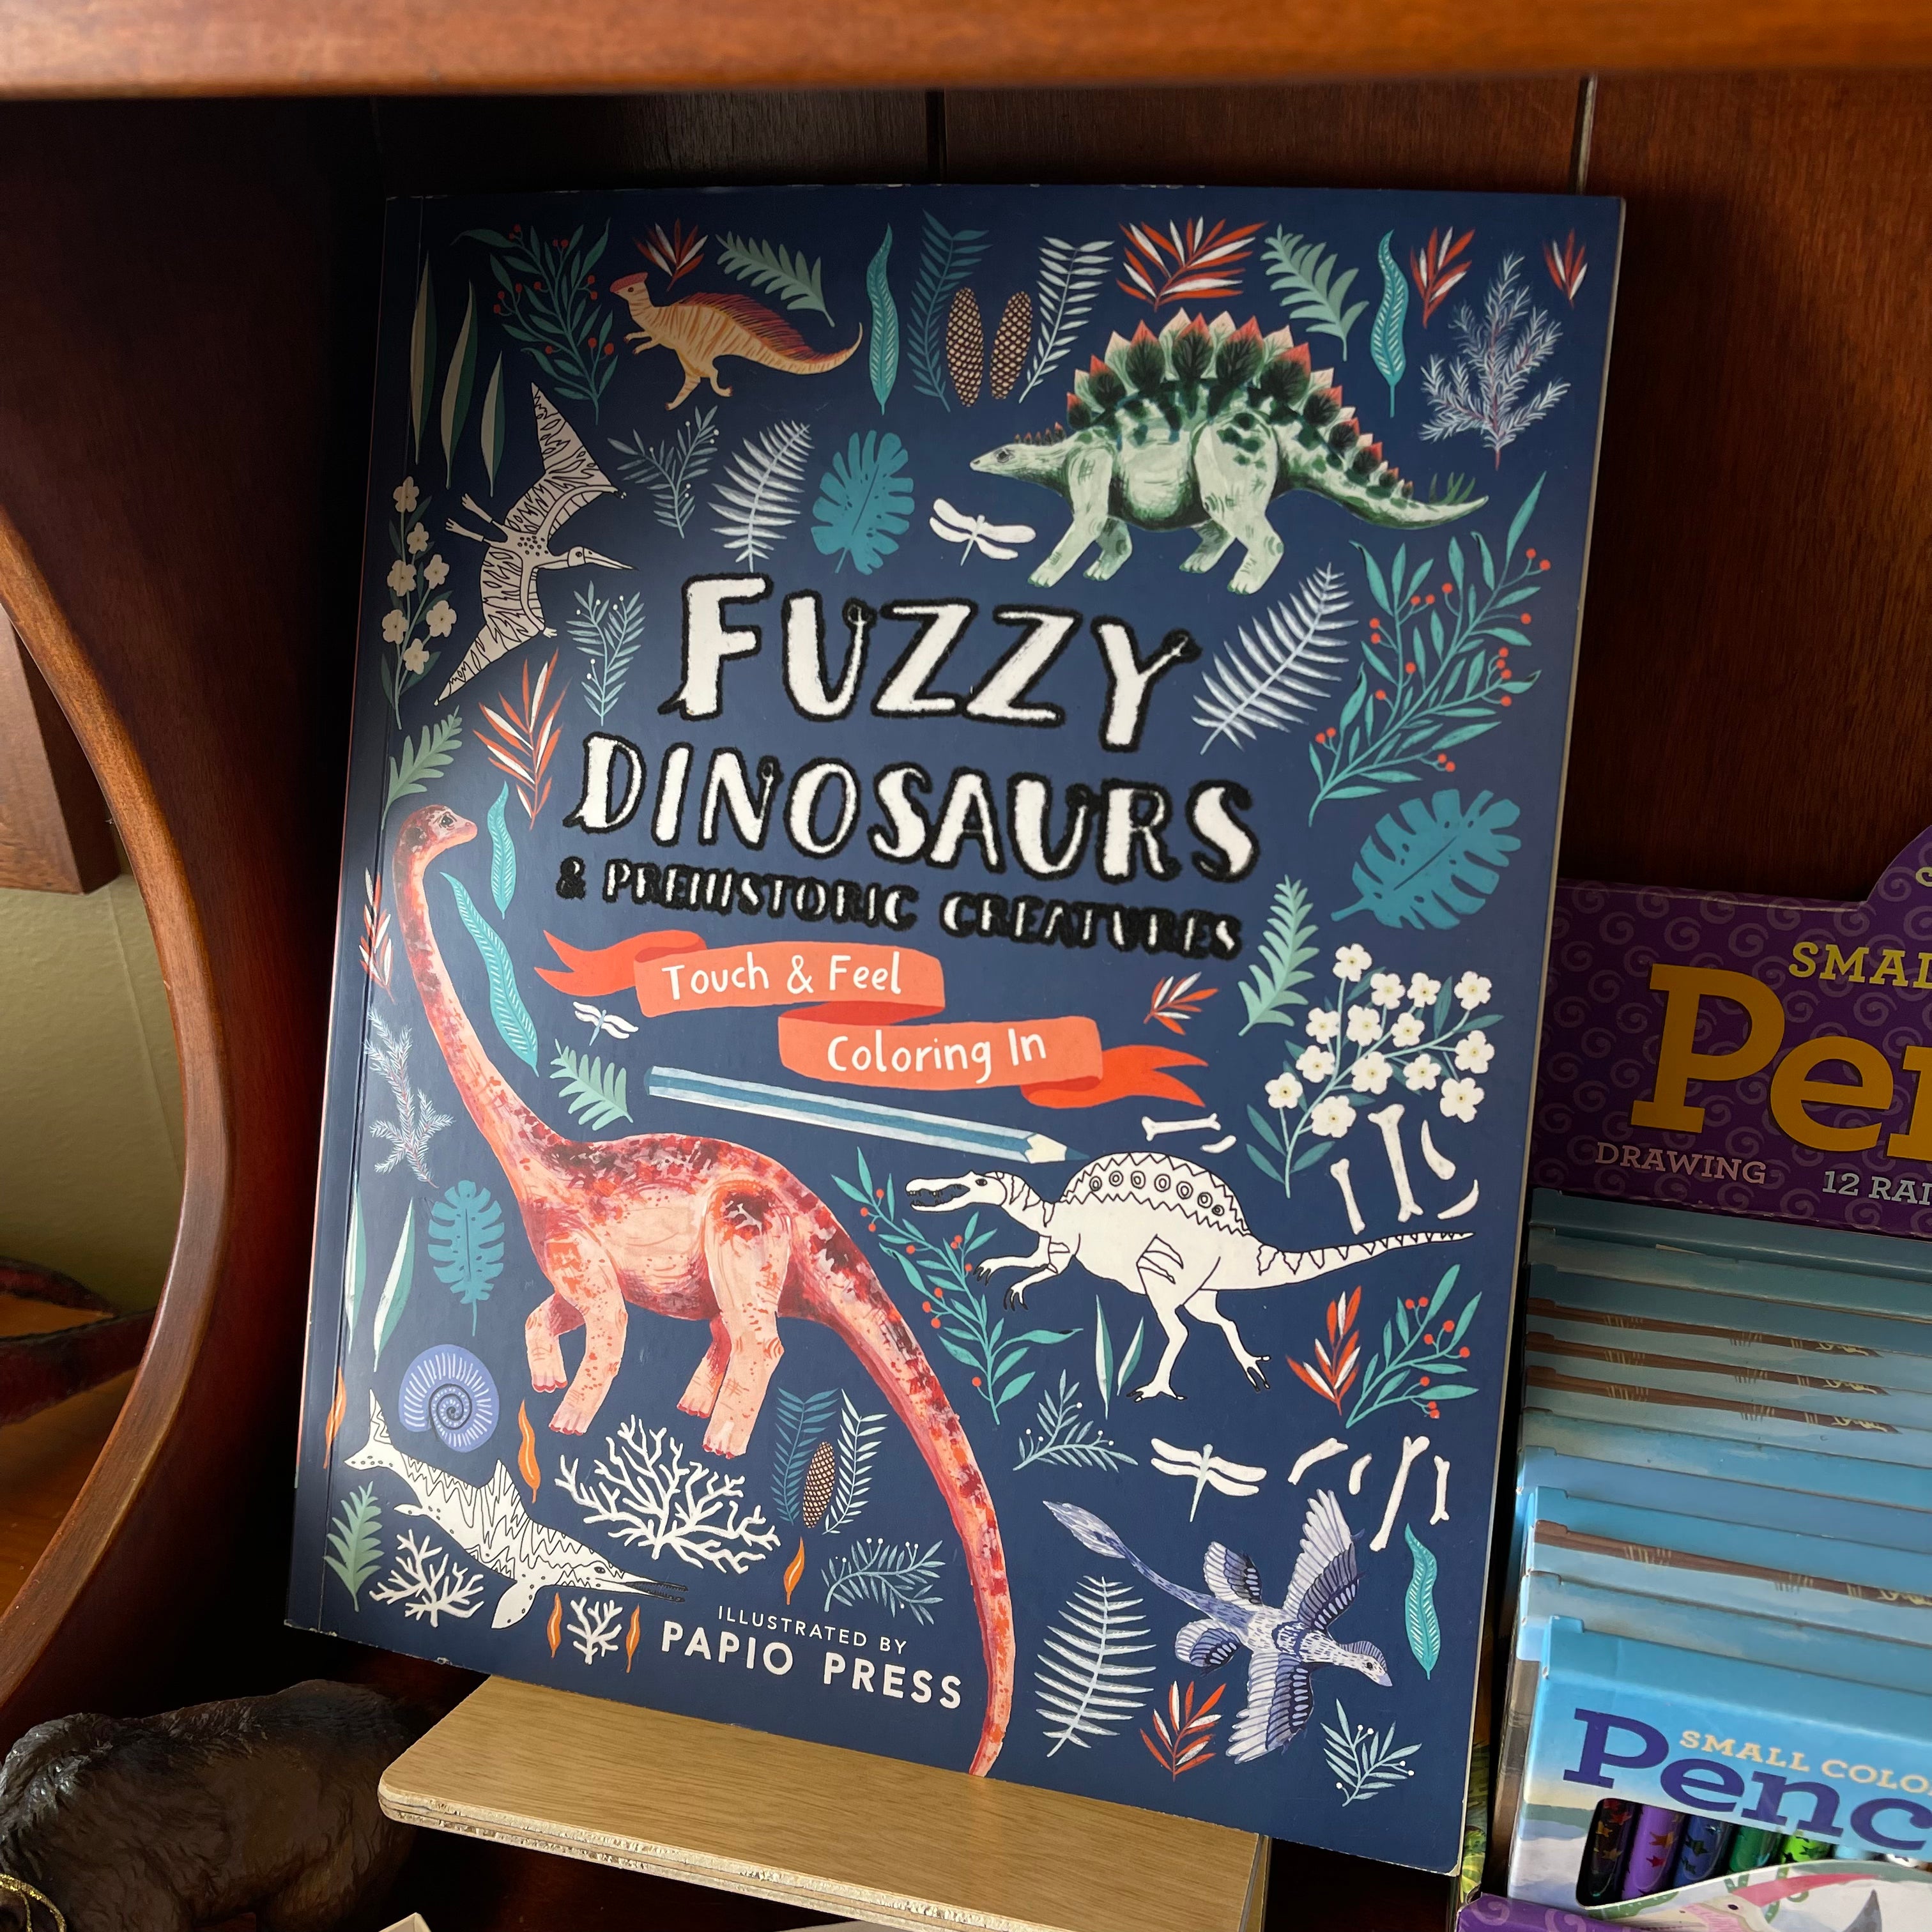 Fuzzy Dinosaurs and Pre-Historic Creatures Coloring Book